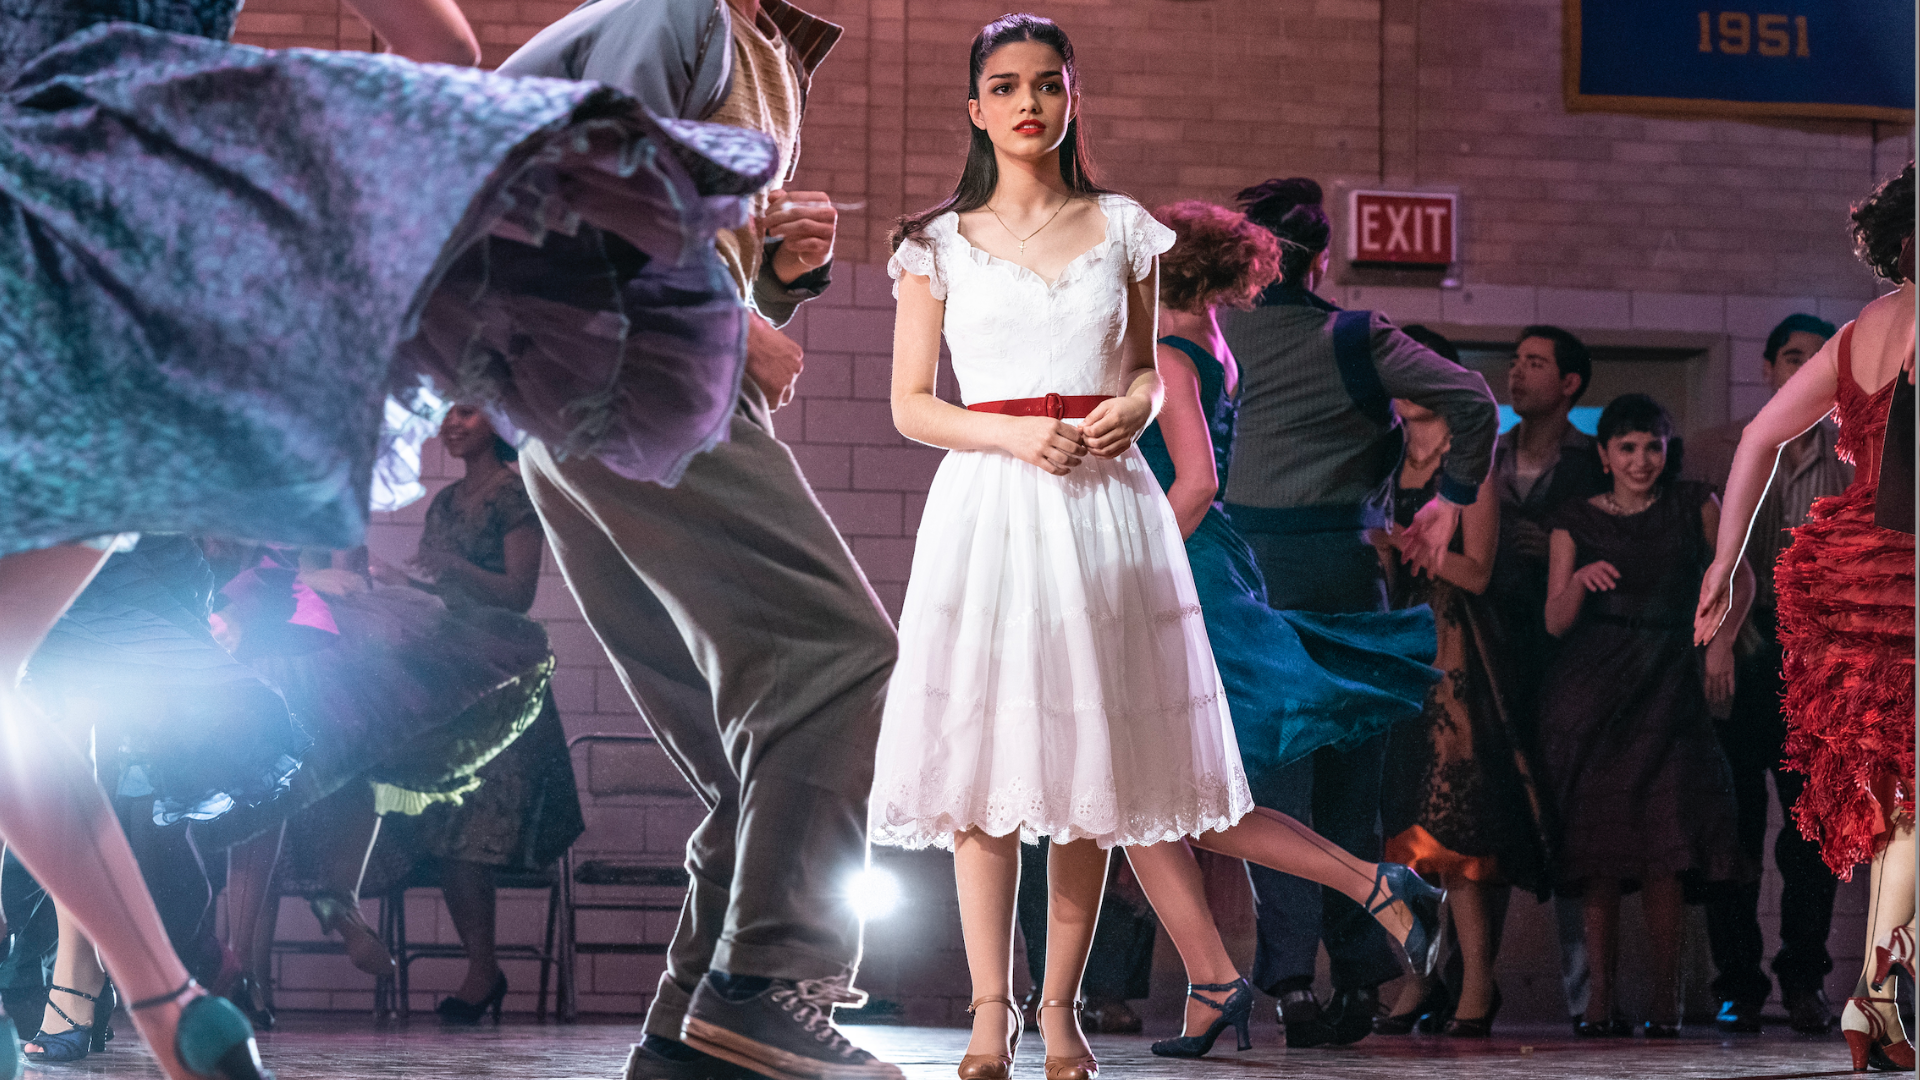 Rachel Zegler as Maria in 'West Side Story' stands in a white dress at a school dance. 